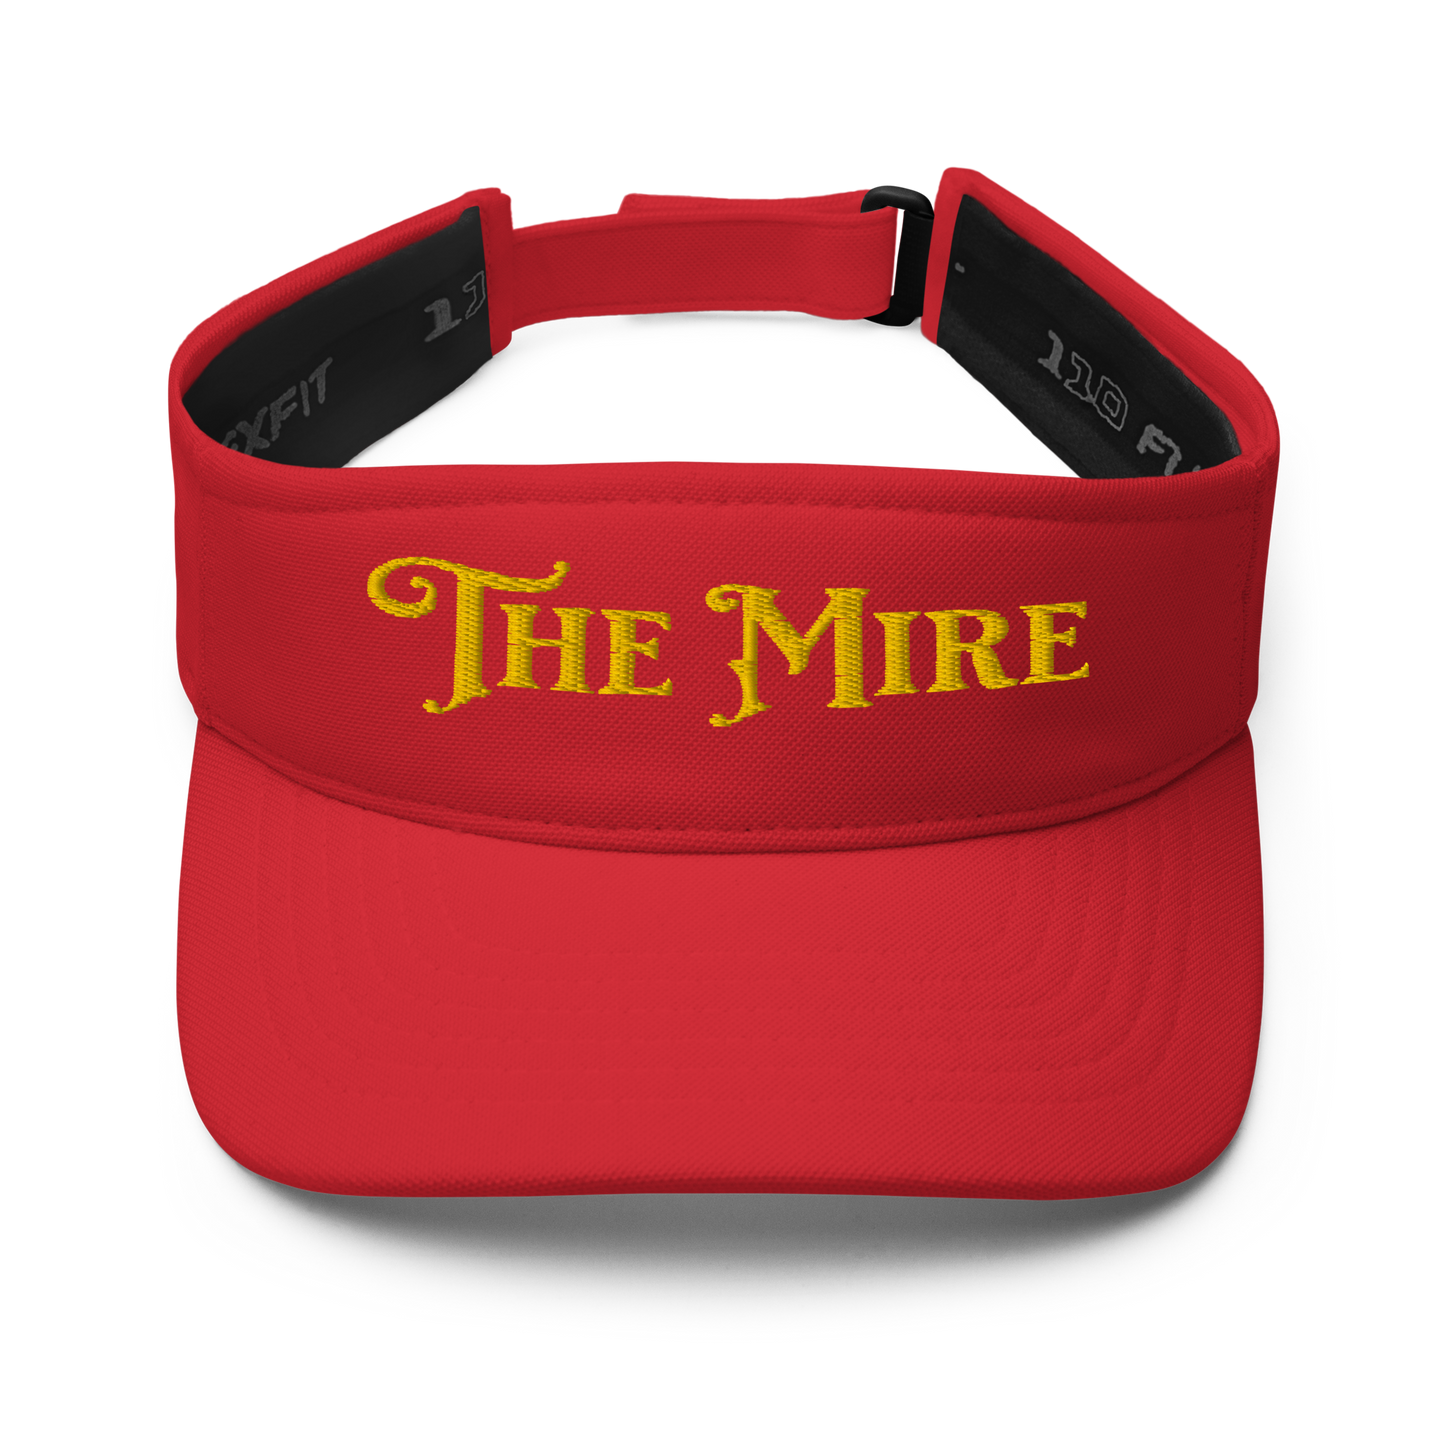 The Mire | Flat Embroidery | Inspired Strings Art Cap | Lot Style Visor | Bluegrass Band Swag